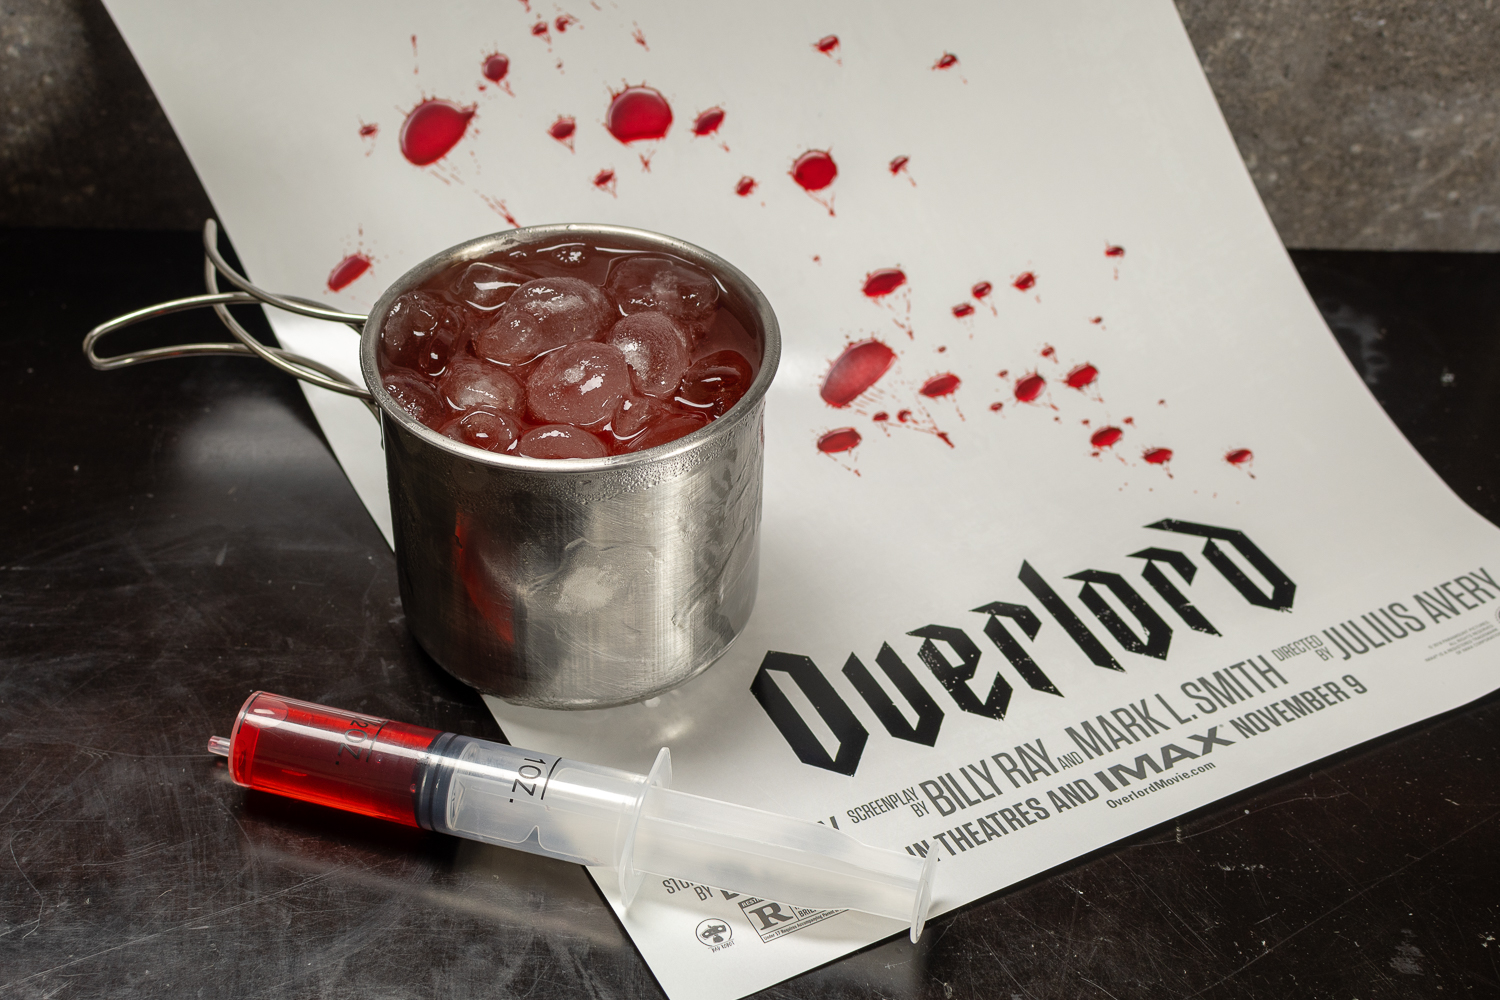 Horror Movie Recipes | Cocktail Recipes | Halloween Drinks | The Geeks have created a creepy recipe, the War is Hell cocktail, inspired by the film Overlord. 2geekswhoeat.com